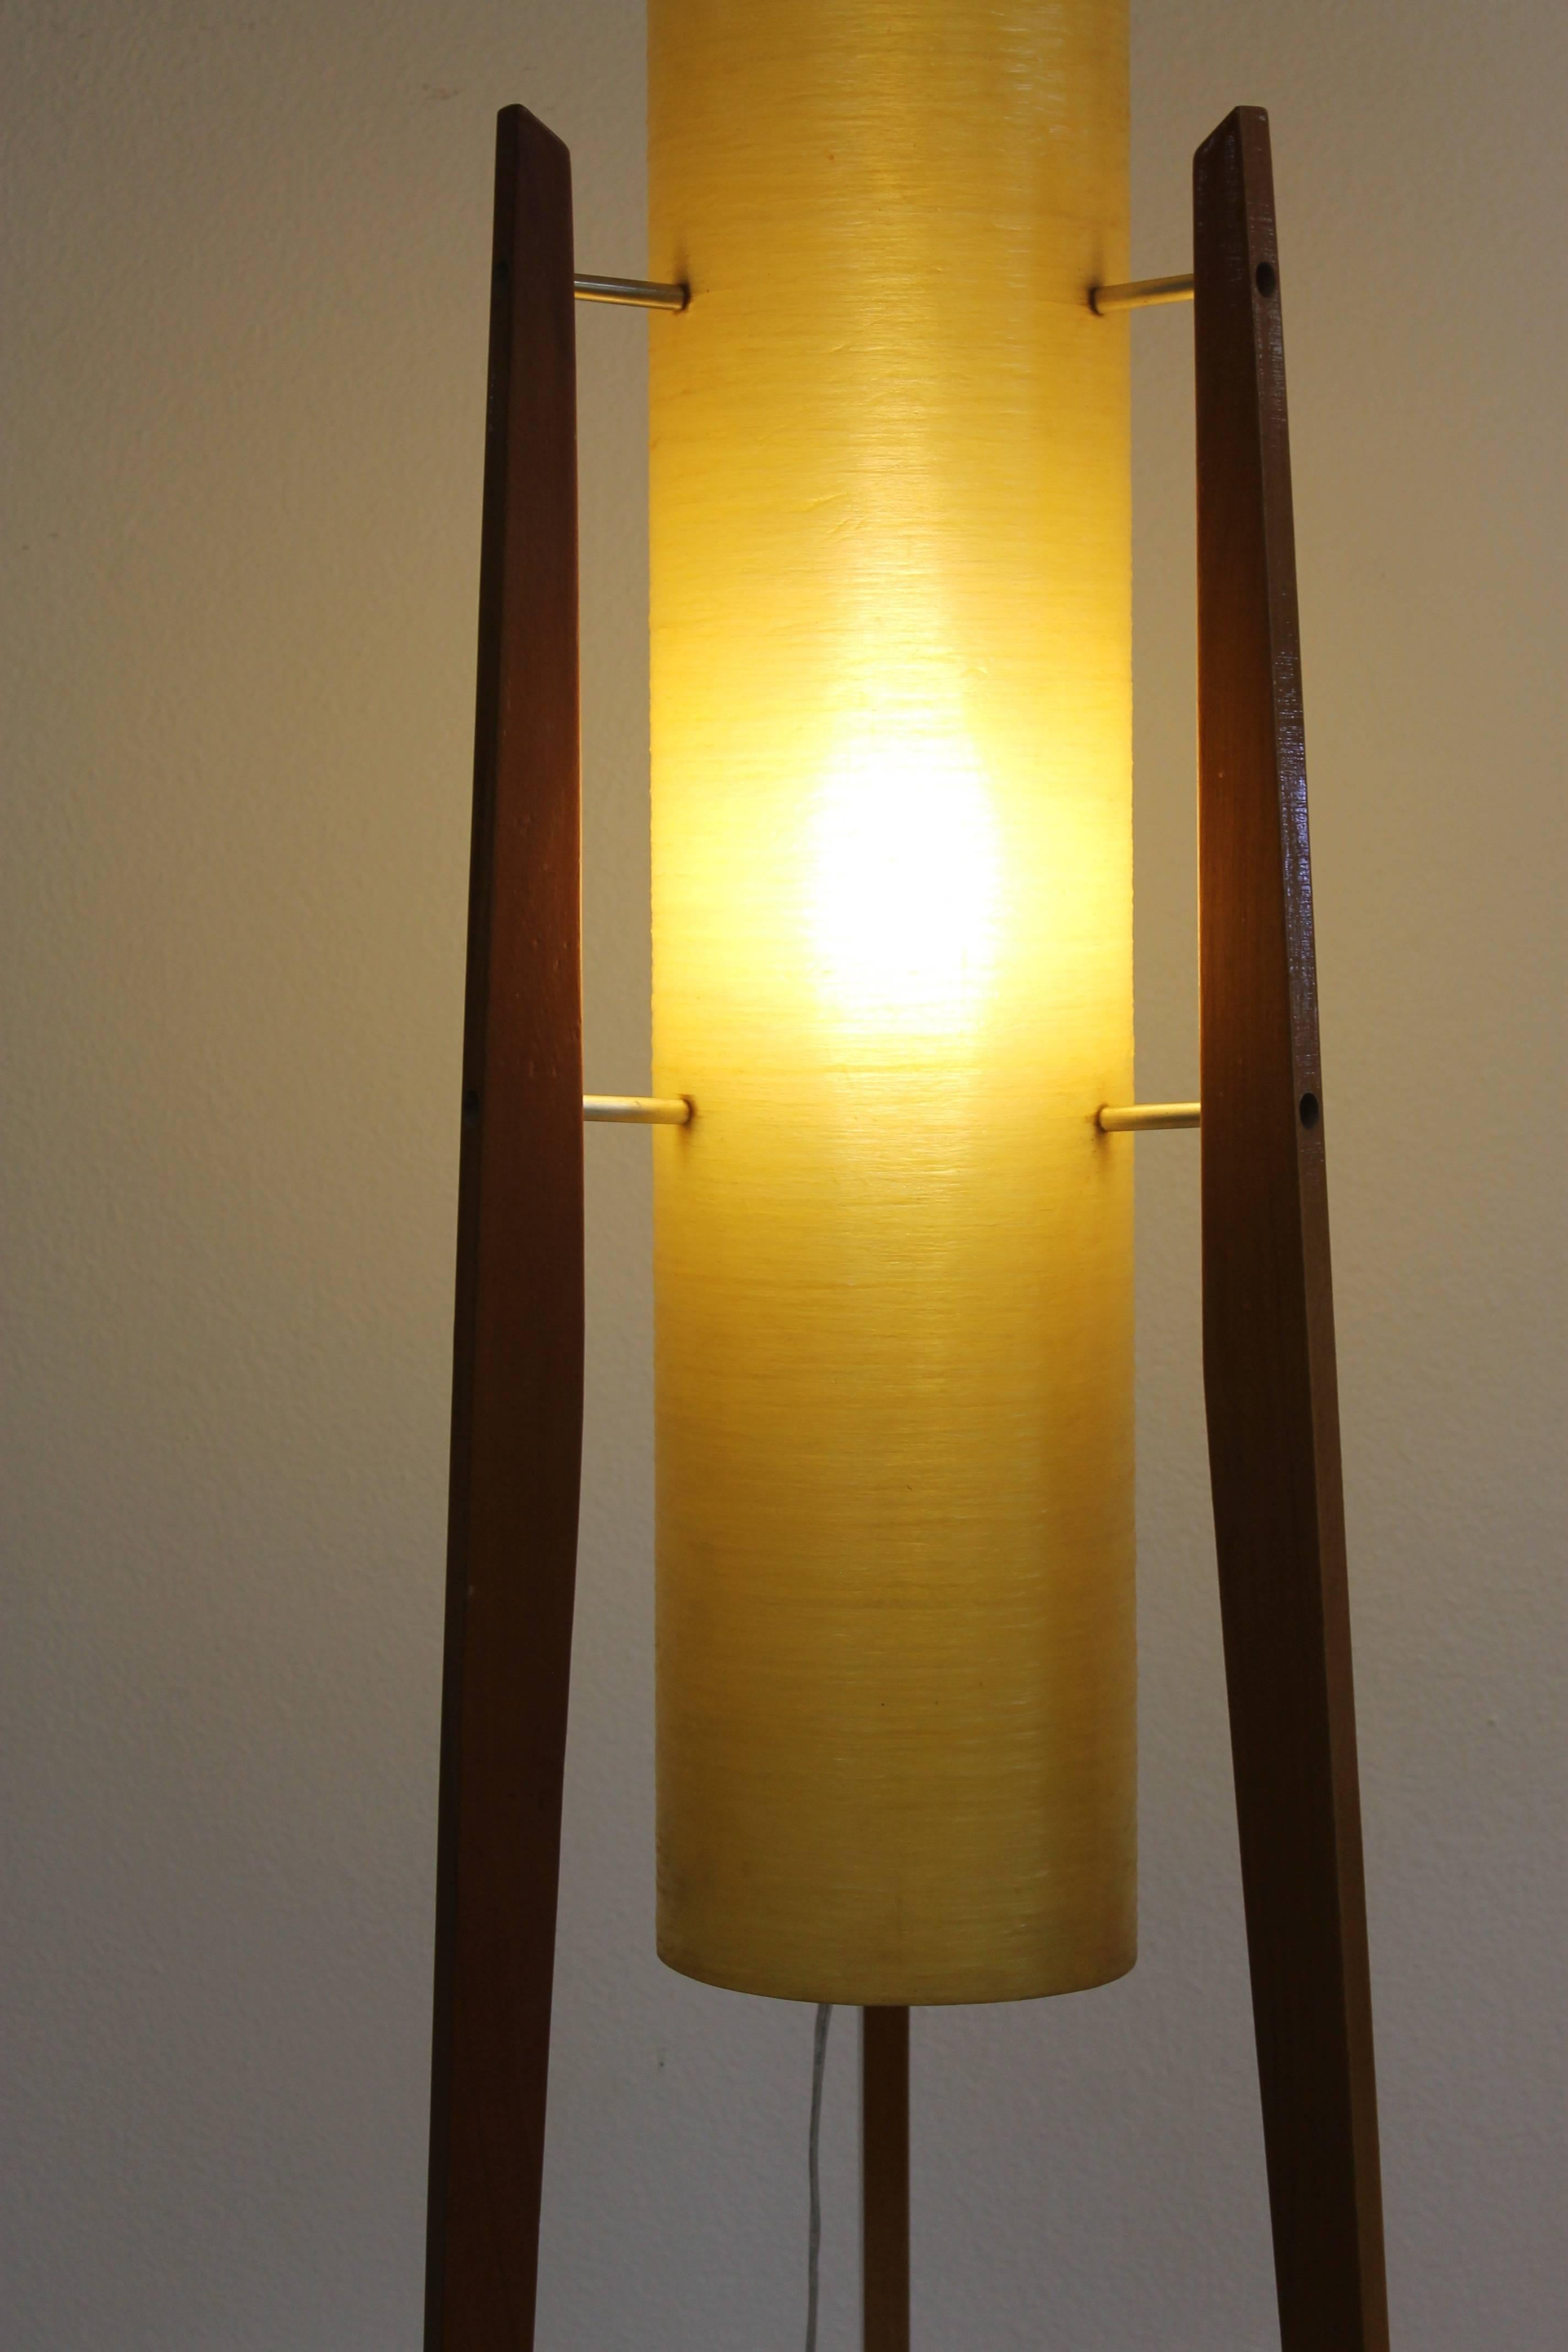 Found in Czechoslovakia, this lamp features a cast resin cylinder in muted yellow supported by three tapered hardwood legs. Beautiful yellowish glow is similar to that of spun fiberglass lamps of the same period. The lamp measures 46.25